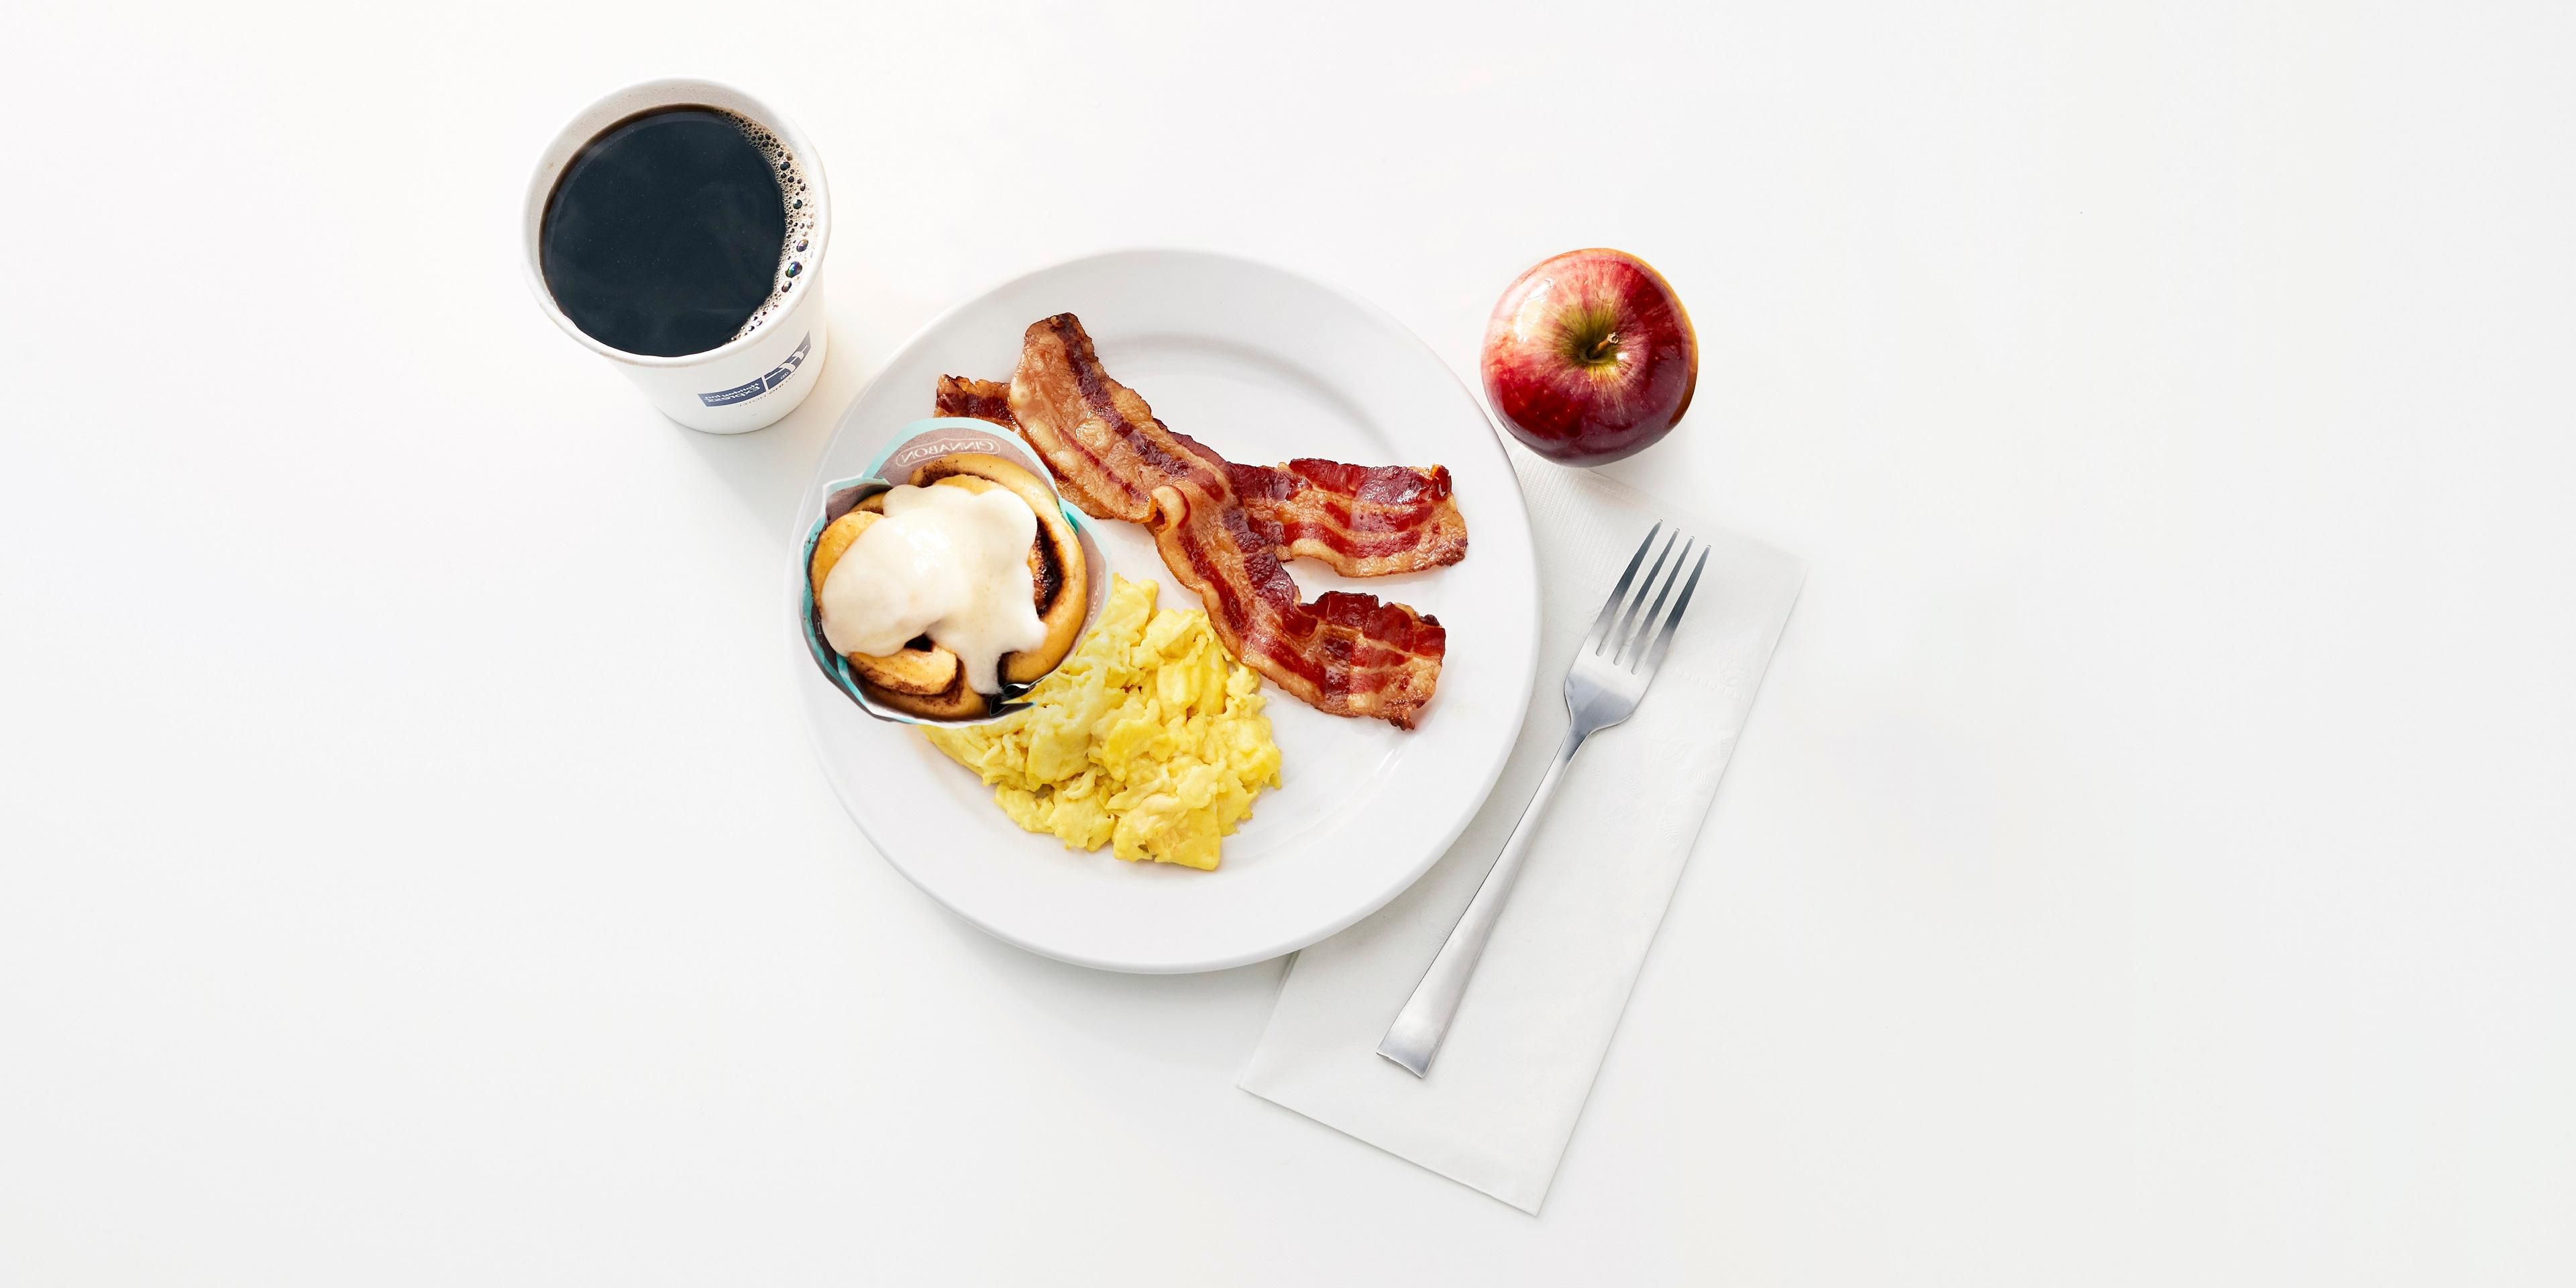 Kick start your day with our free Express Start Breakfast, with grab ‘n’ go options and favorites such as eggs and bacon, hot pancakes, our signature cinnamon rolls and fresh coffee. Offered from 6:30 AM to 9:30 AM .